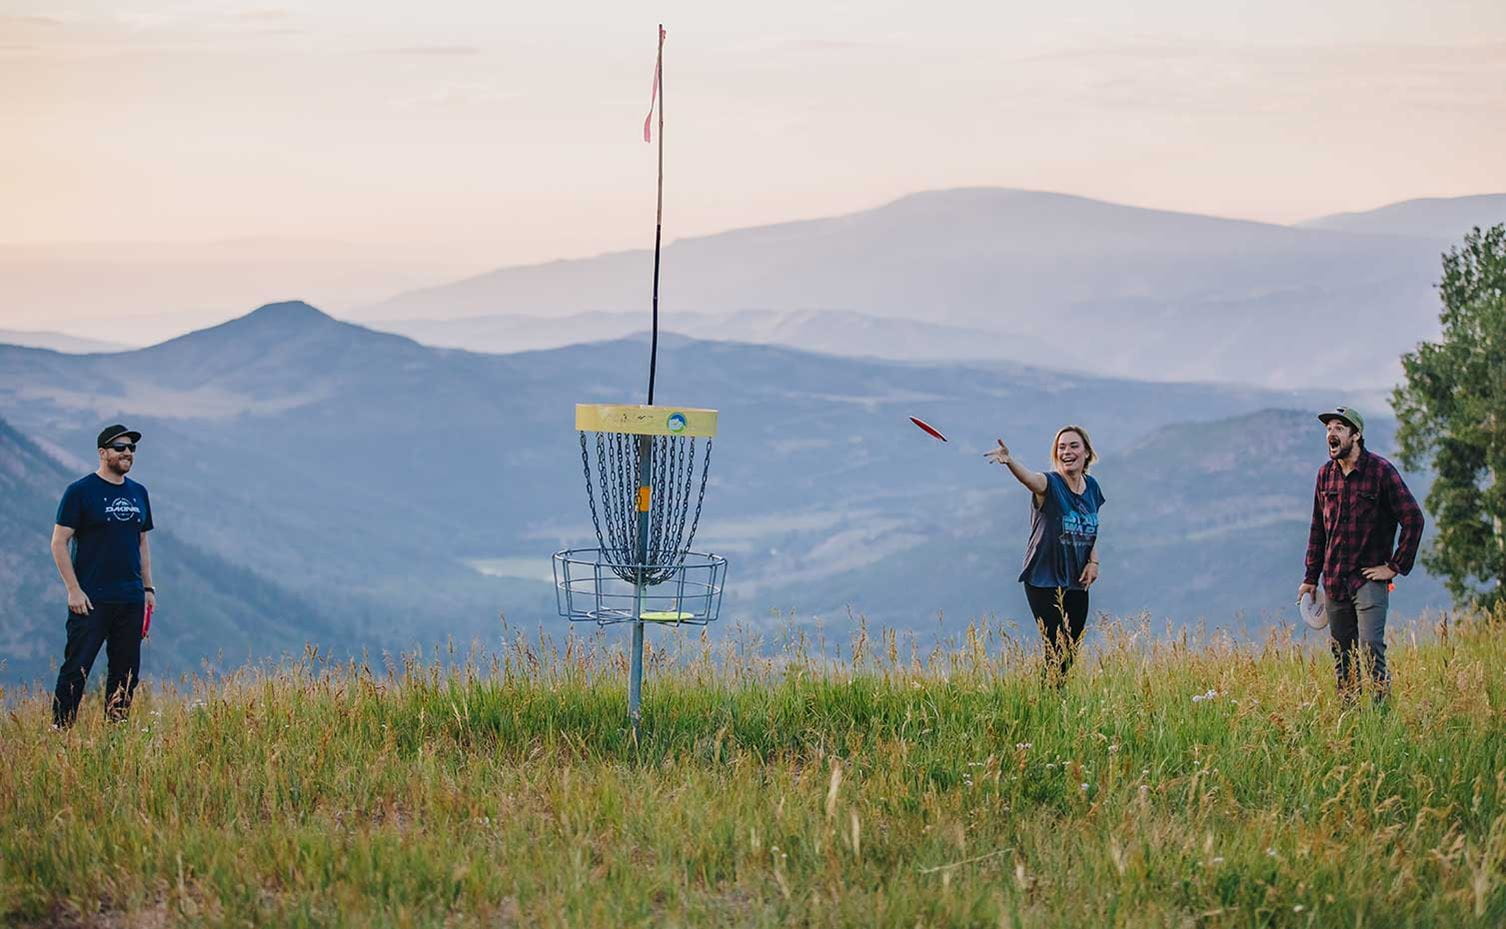 Playing disc golf at Snowmass is fun